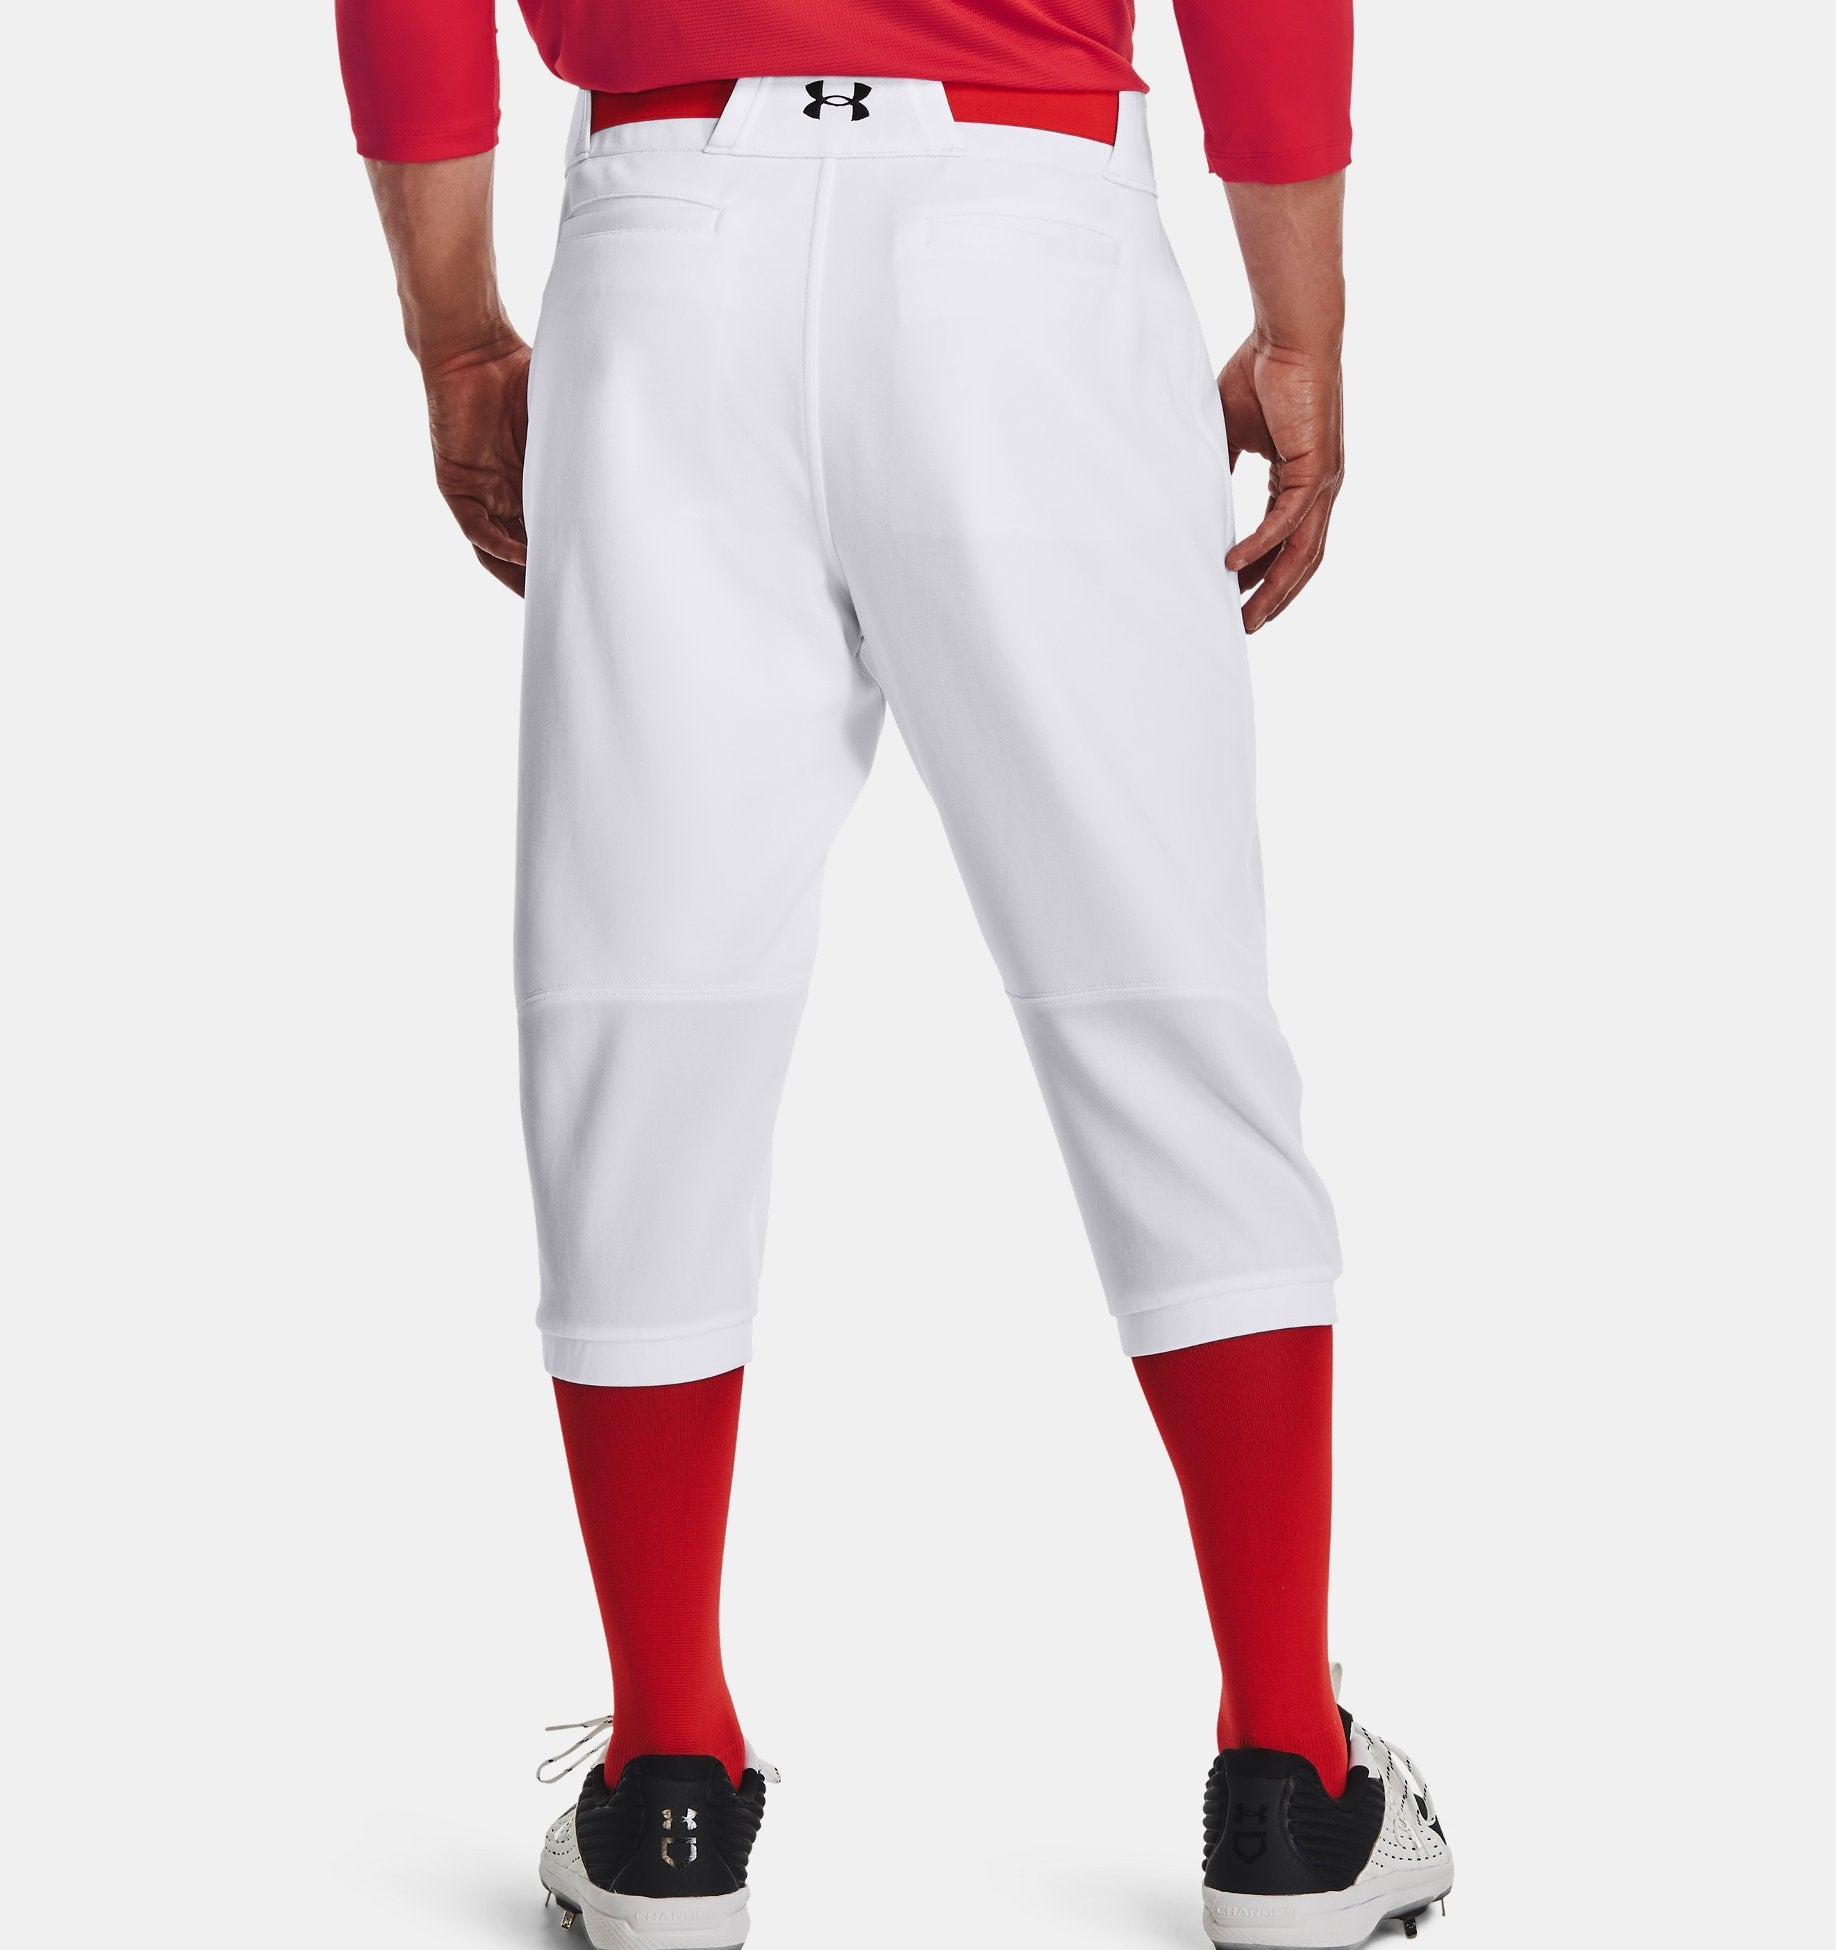 Under Armour Boys' Utility Knicker Baseball Pants | Dick's Sporting Goods